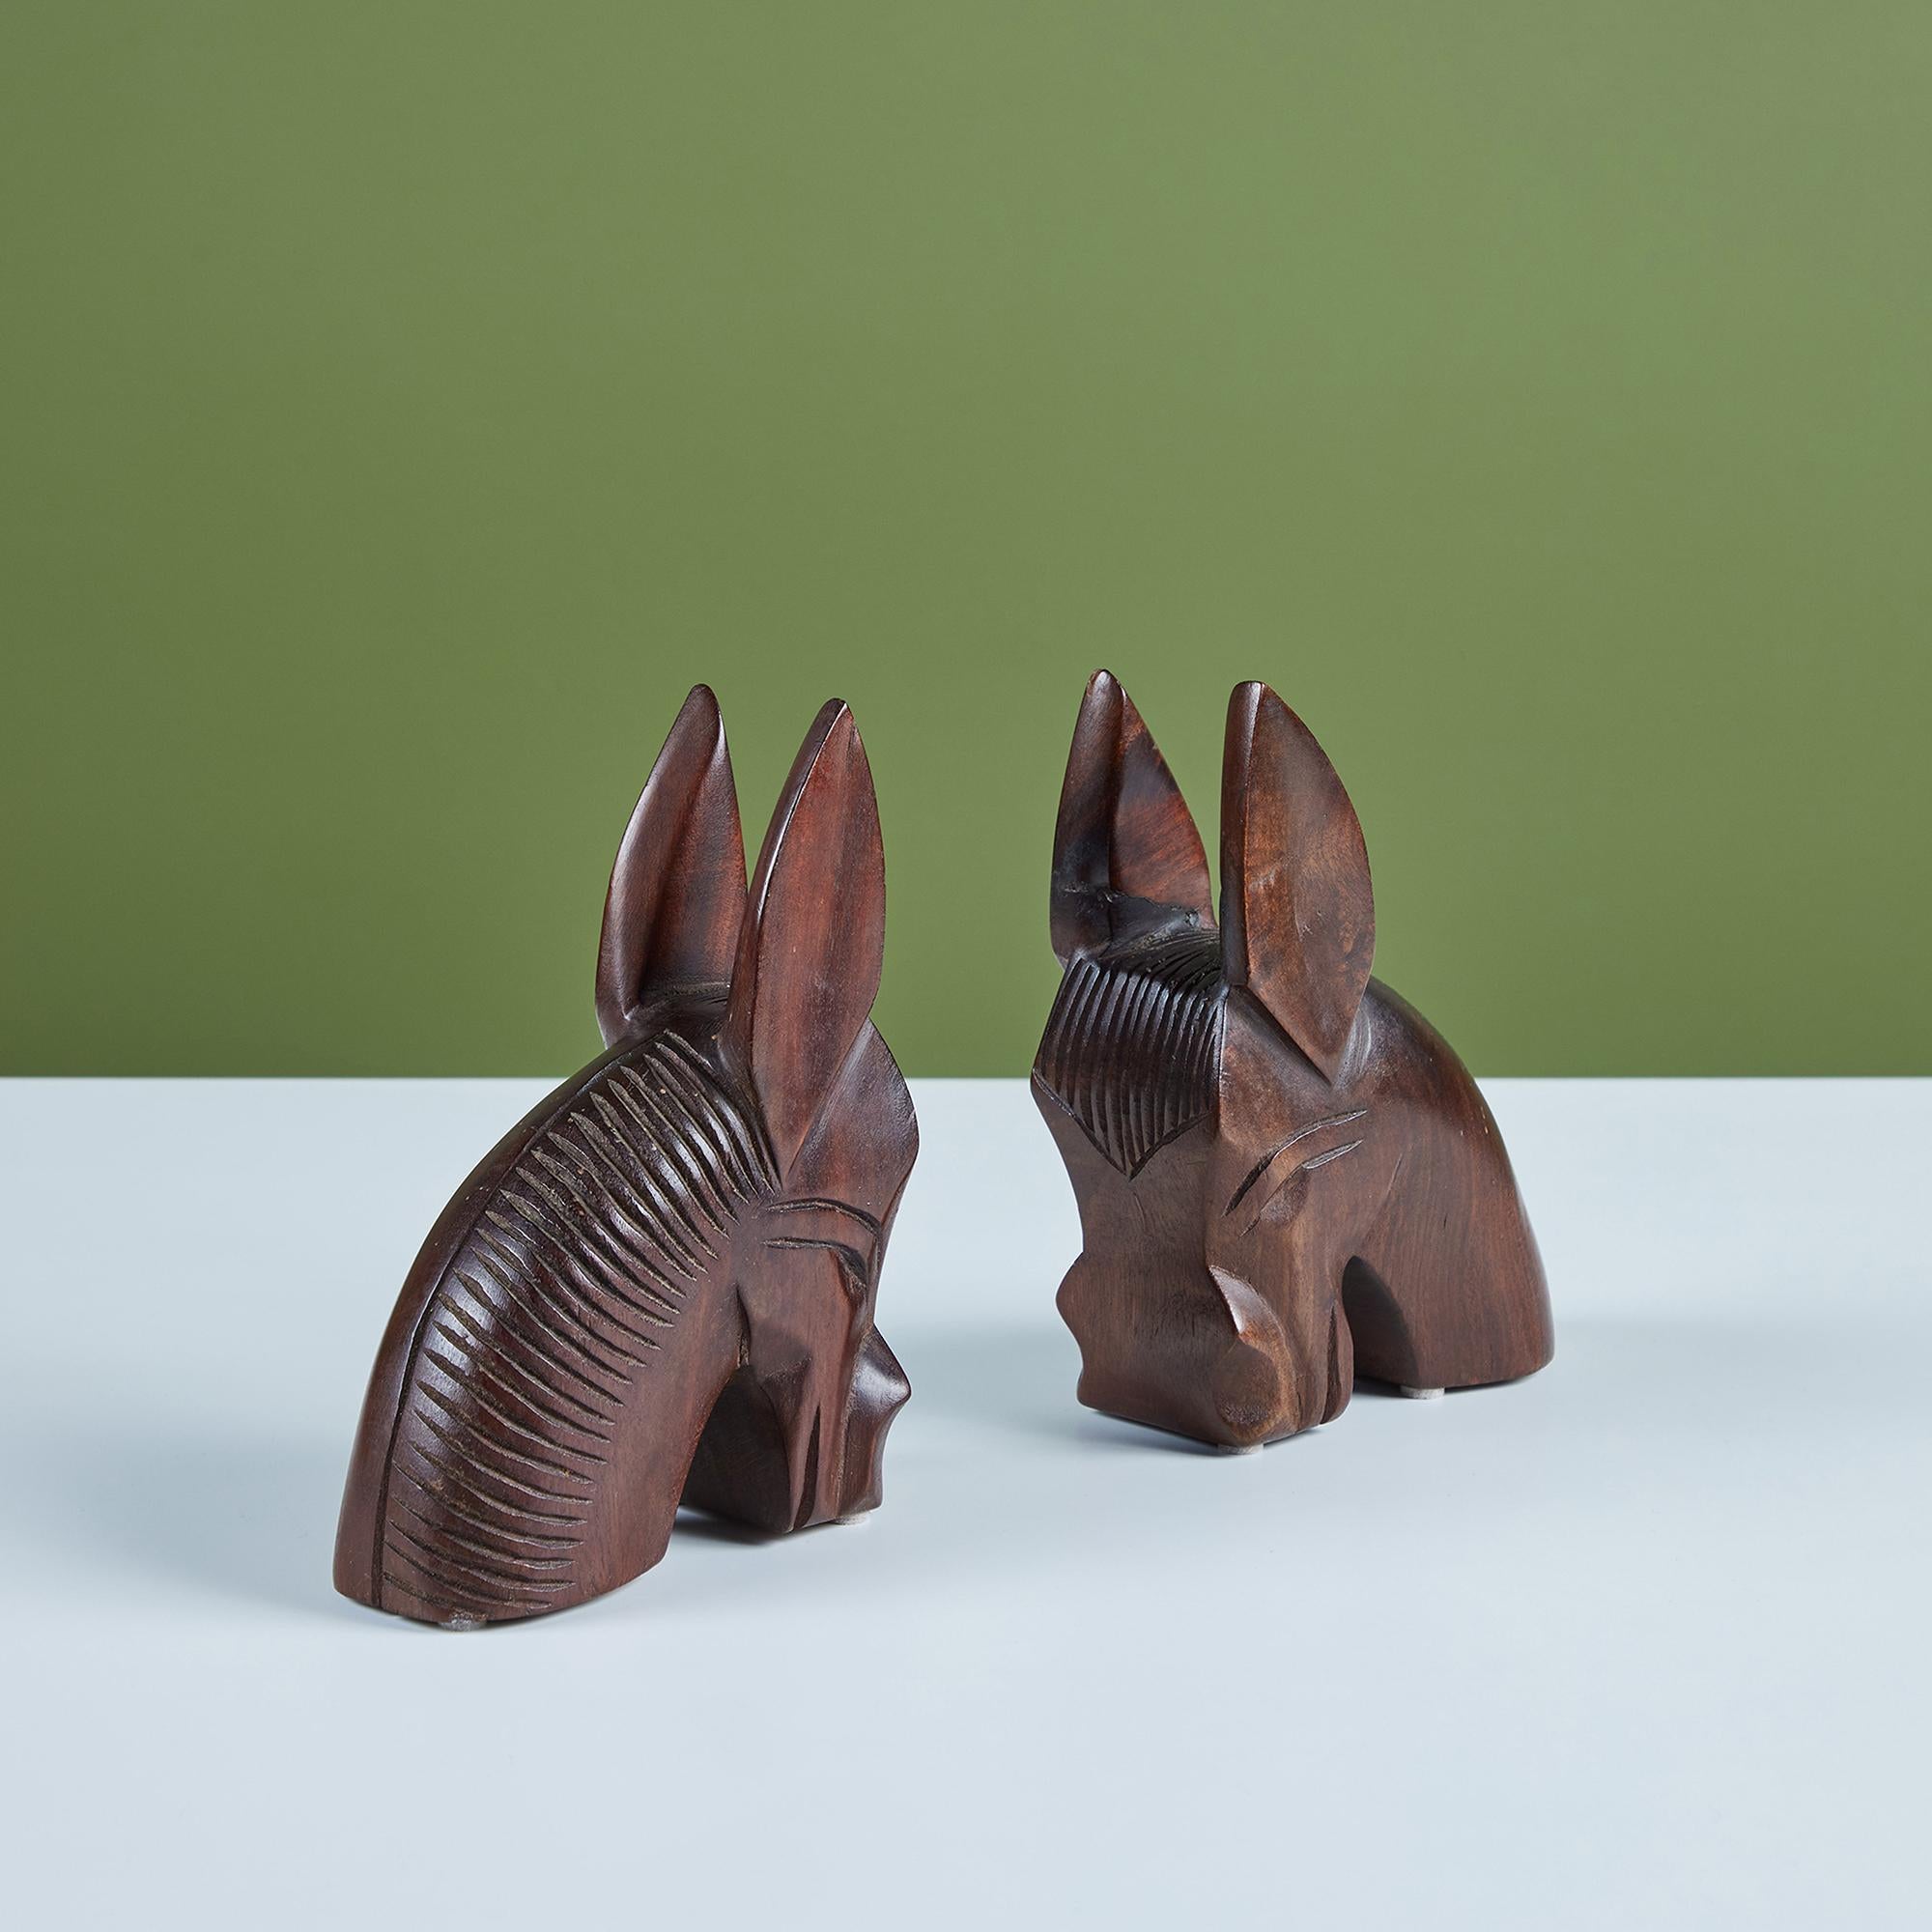 A pair of solid wood bookends hand carved into the shape of donkey heads. Each donkey has ears that stand at attention and a dark walnut finish. Marked Made in Haiti -1953.

Dimensions
Each bookend measures: 4.75